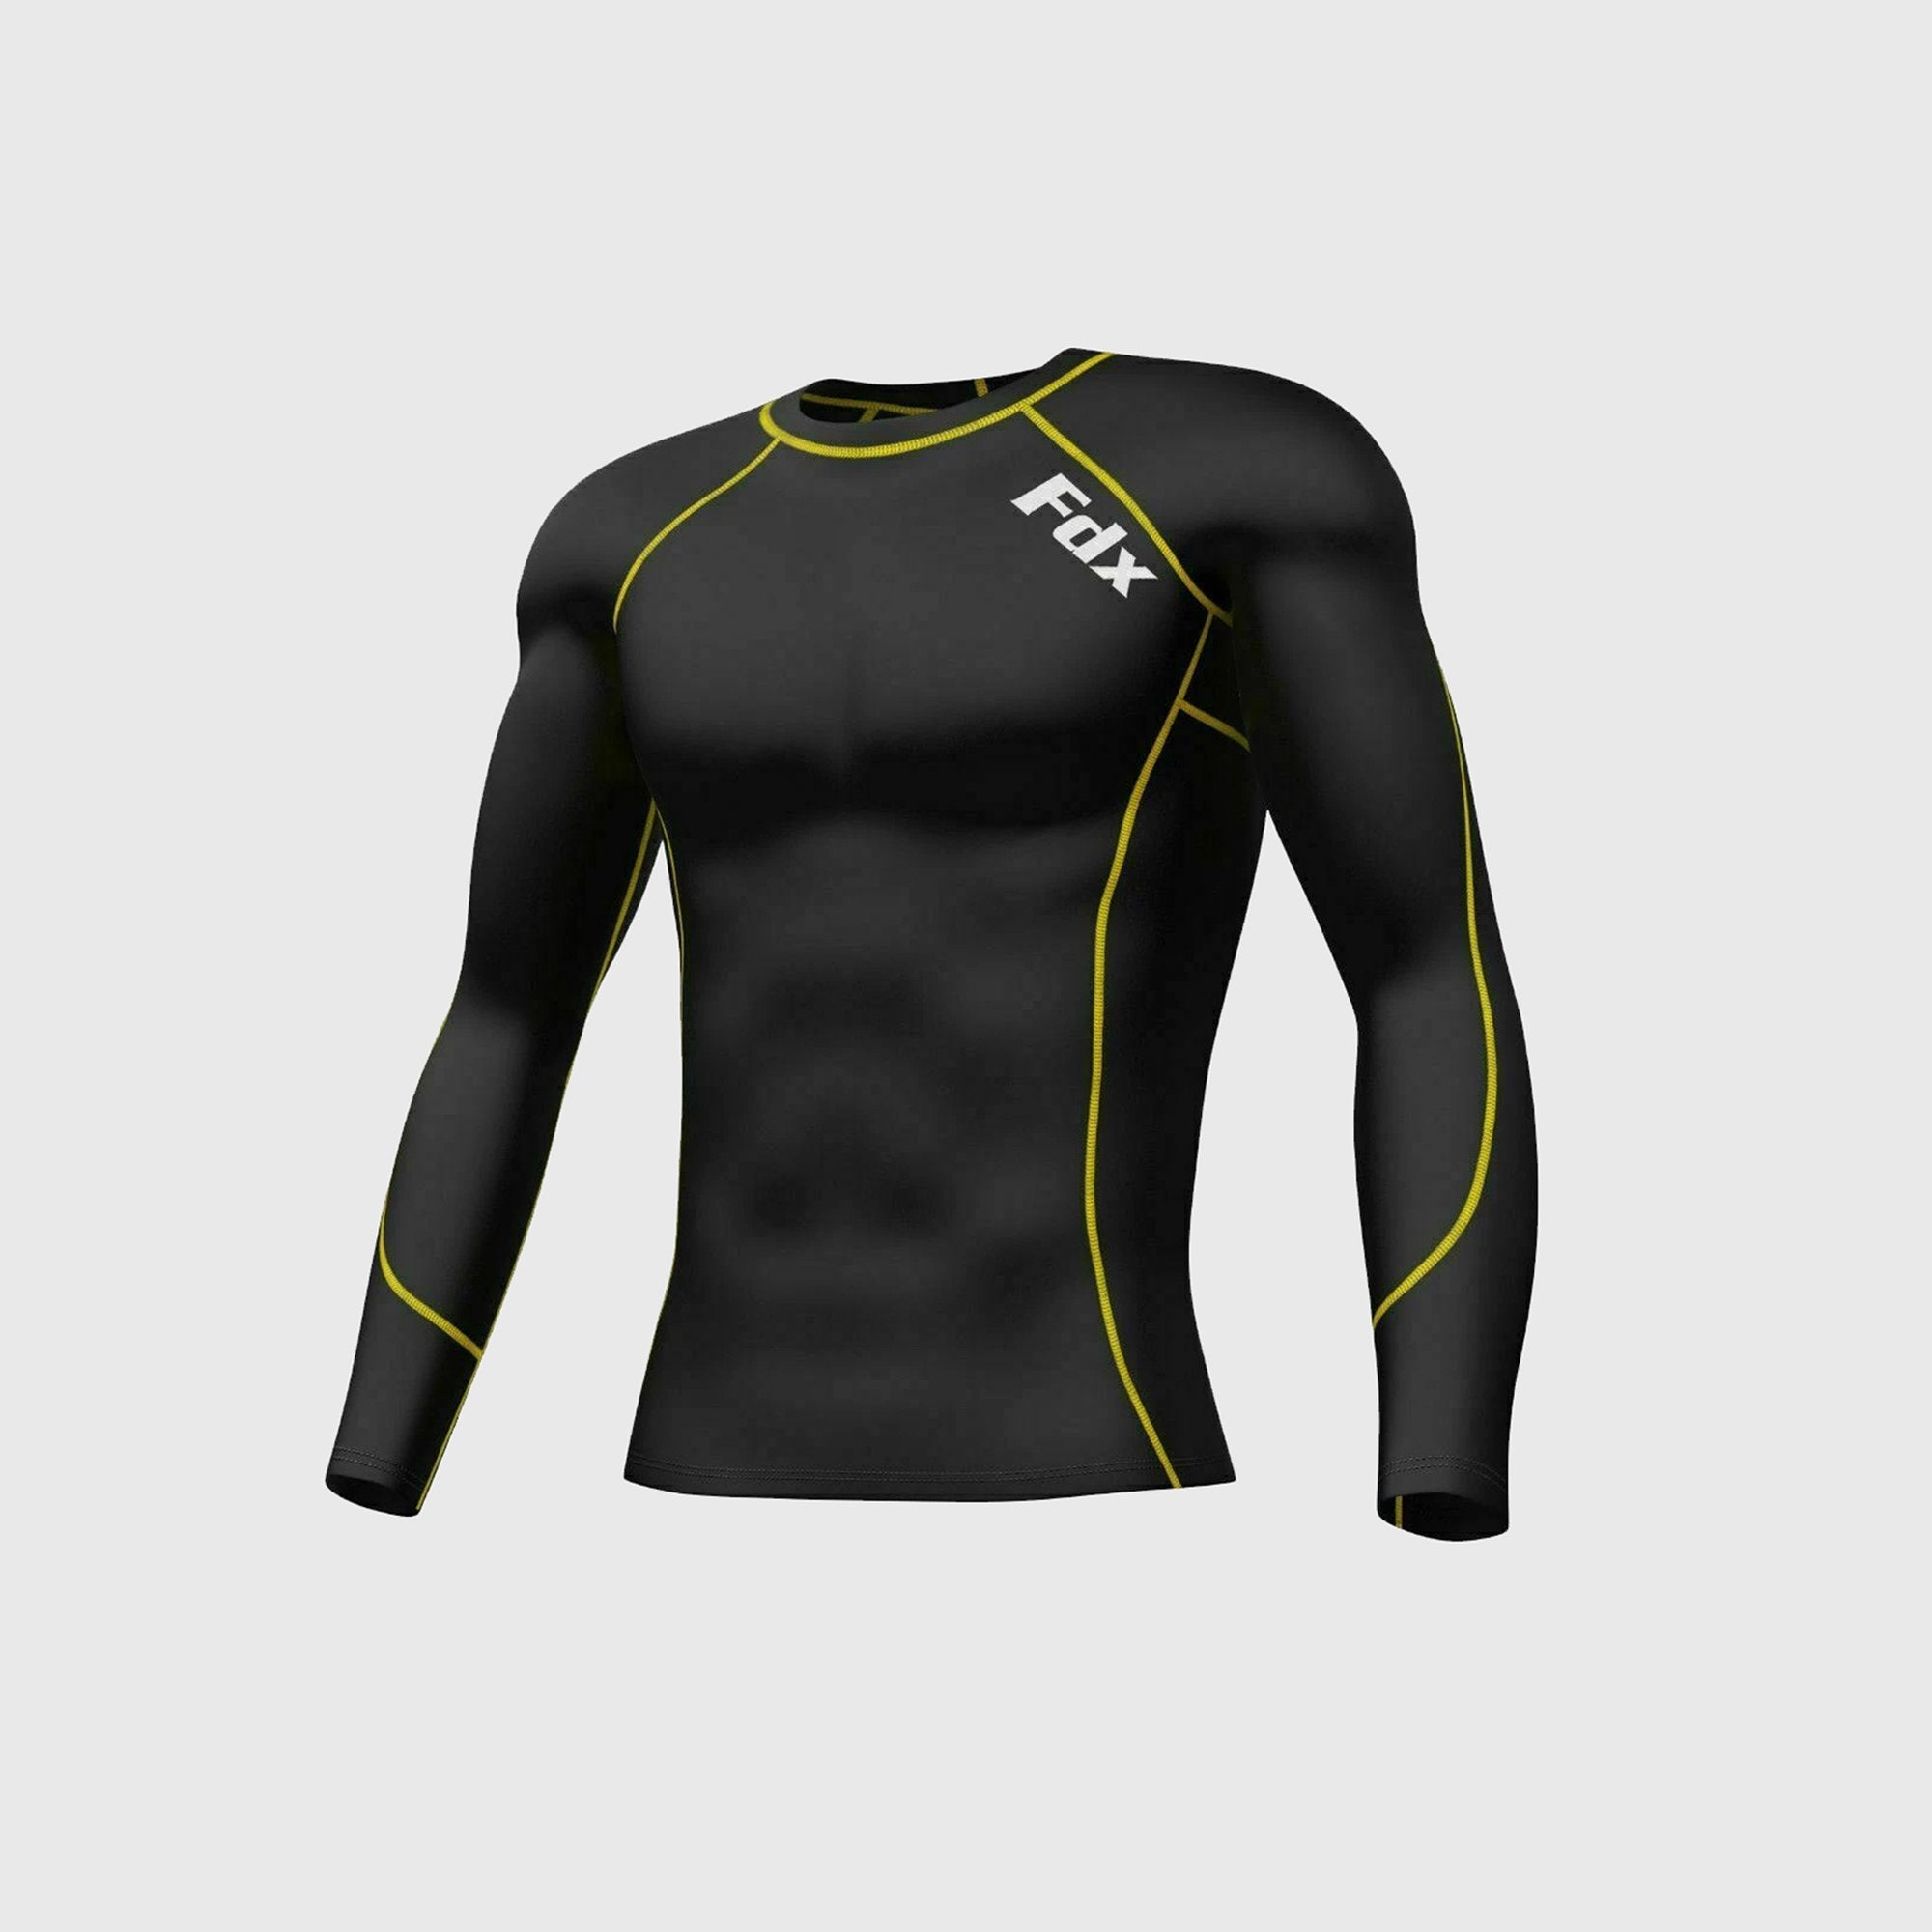 Fdx Men's Black & Yellow Long Sleeve Compression Top Running Gym Workout Wear Rash Guard Stretchable Breathable - Blitz